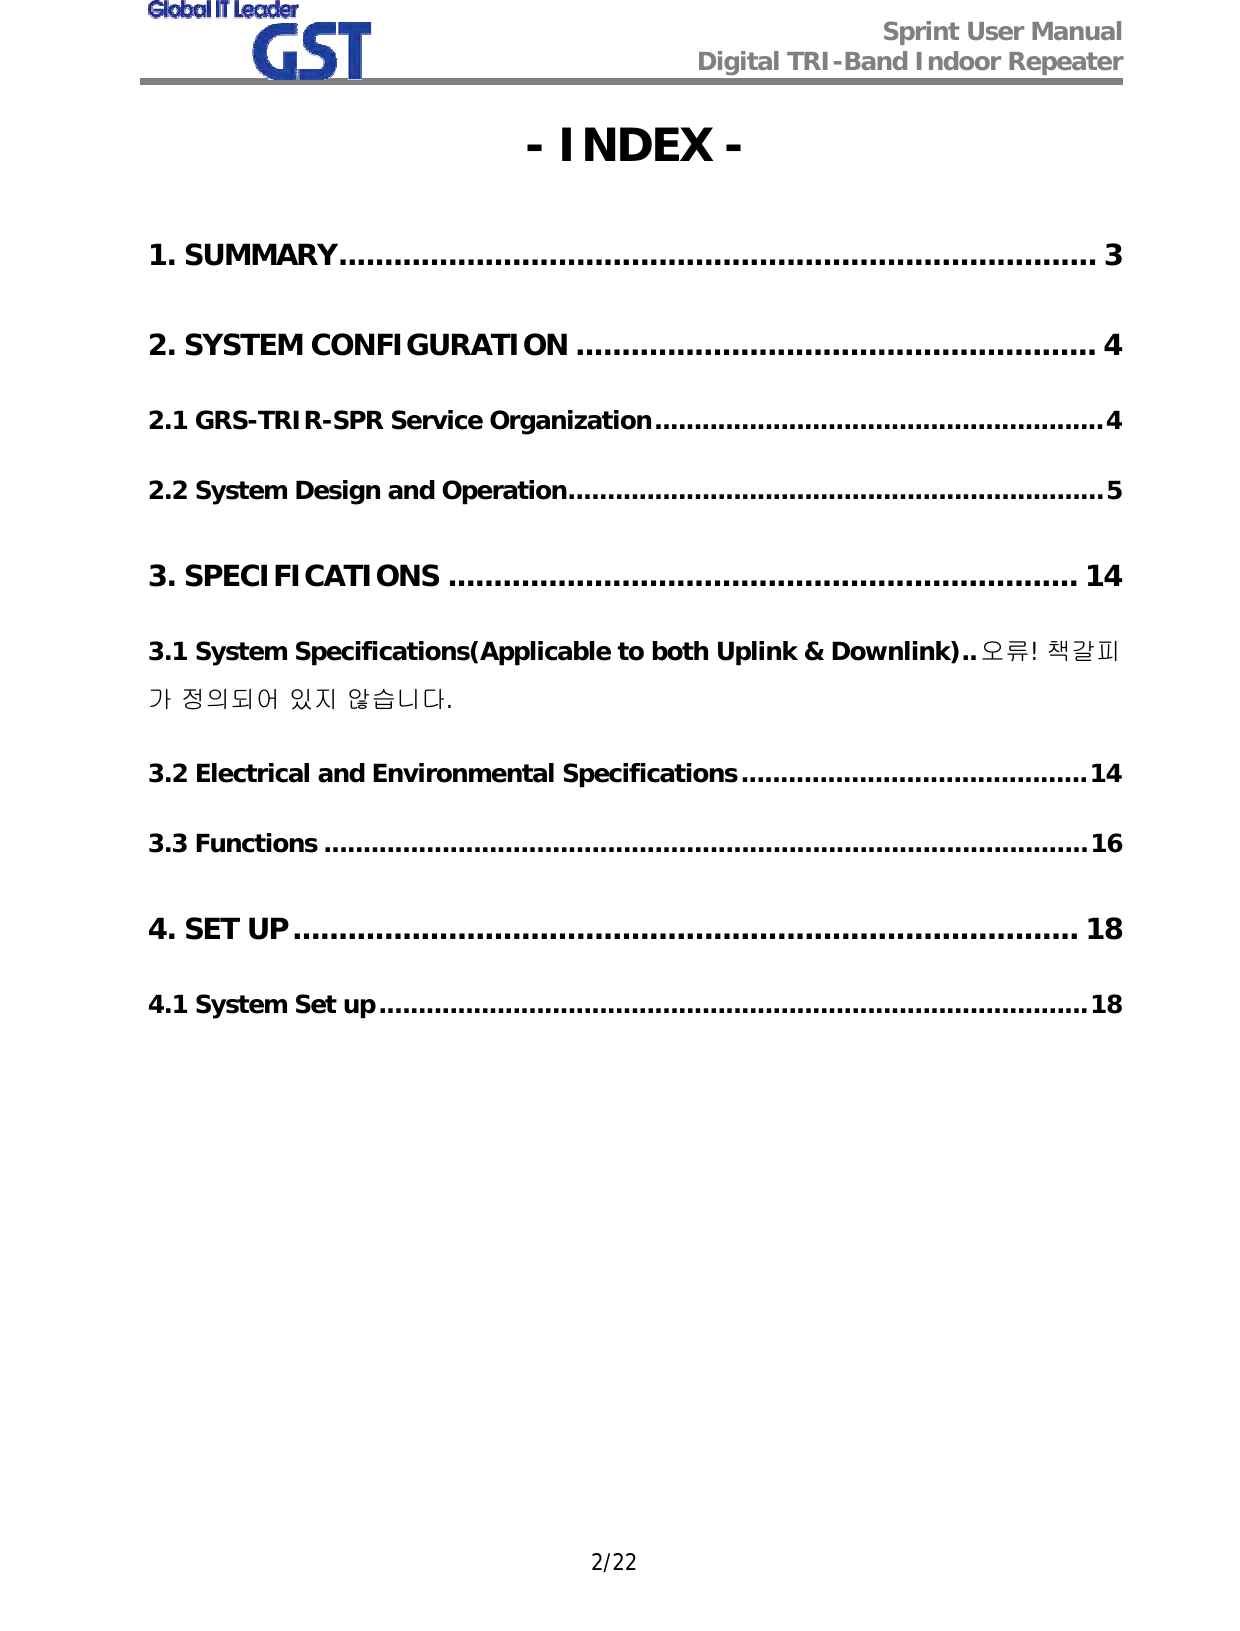  Sprint User Manual Digital TRI-Band Indoor Repeater   2/22 - INDEX - 1. SUMMARY................................................................................... 3 2. SYSTEM CONFIGURATION ......................................................... 4 2.1 GRS-TRIR-SPR Service Organization.........................................................4 2.2 System Design and Operation....................................................................5 3. SPECIFICATIONS ..................................................................... 14 3.1 System Specifications(Applicable to both Uplink &amp; Downlink)..오류! 책갈피가 정의되어 있지 않습니다. 3.2 Electrical and Environmental Specifications............................................14 3.3 Functions .................................................................................................16 4. SET UP...................................................................................... 18 4.1 System Set up..........................................................................................18            